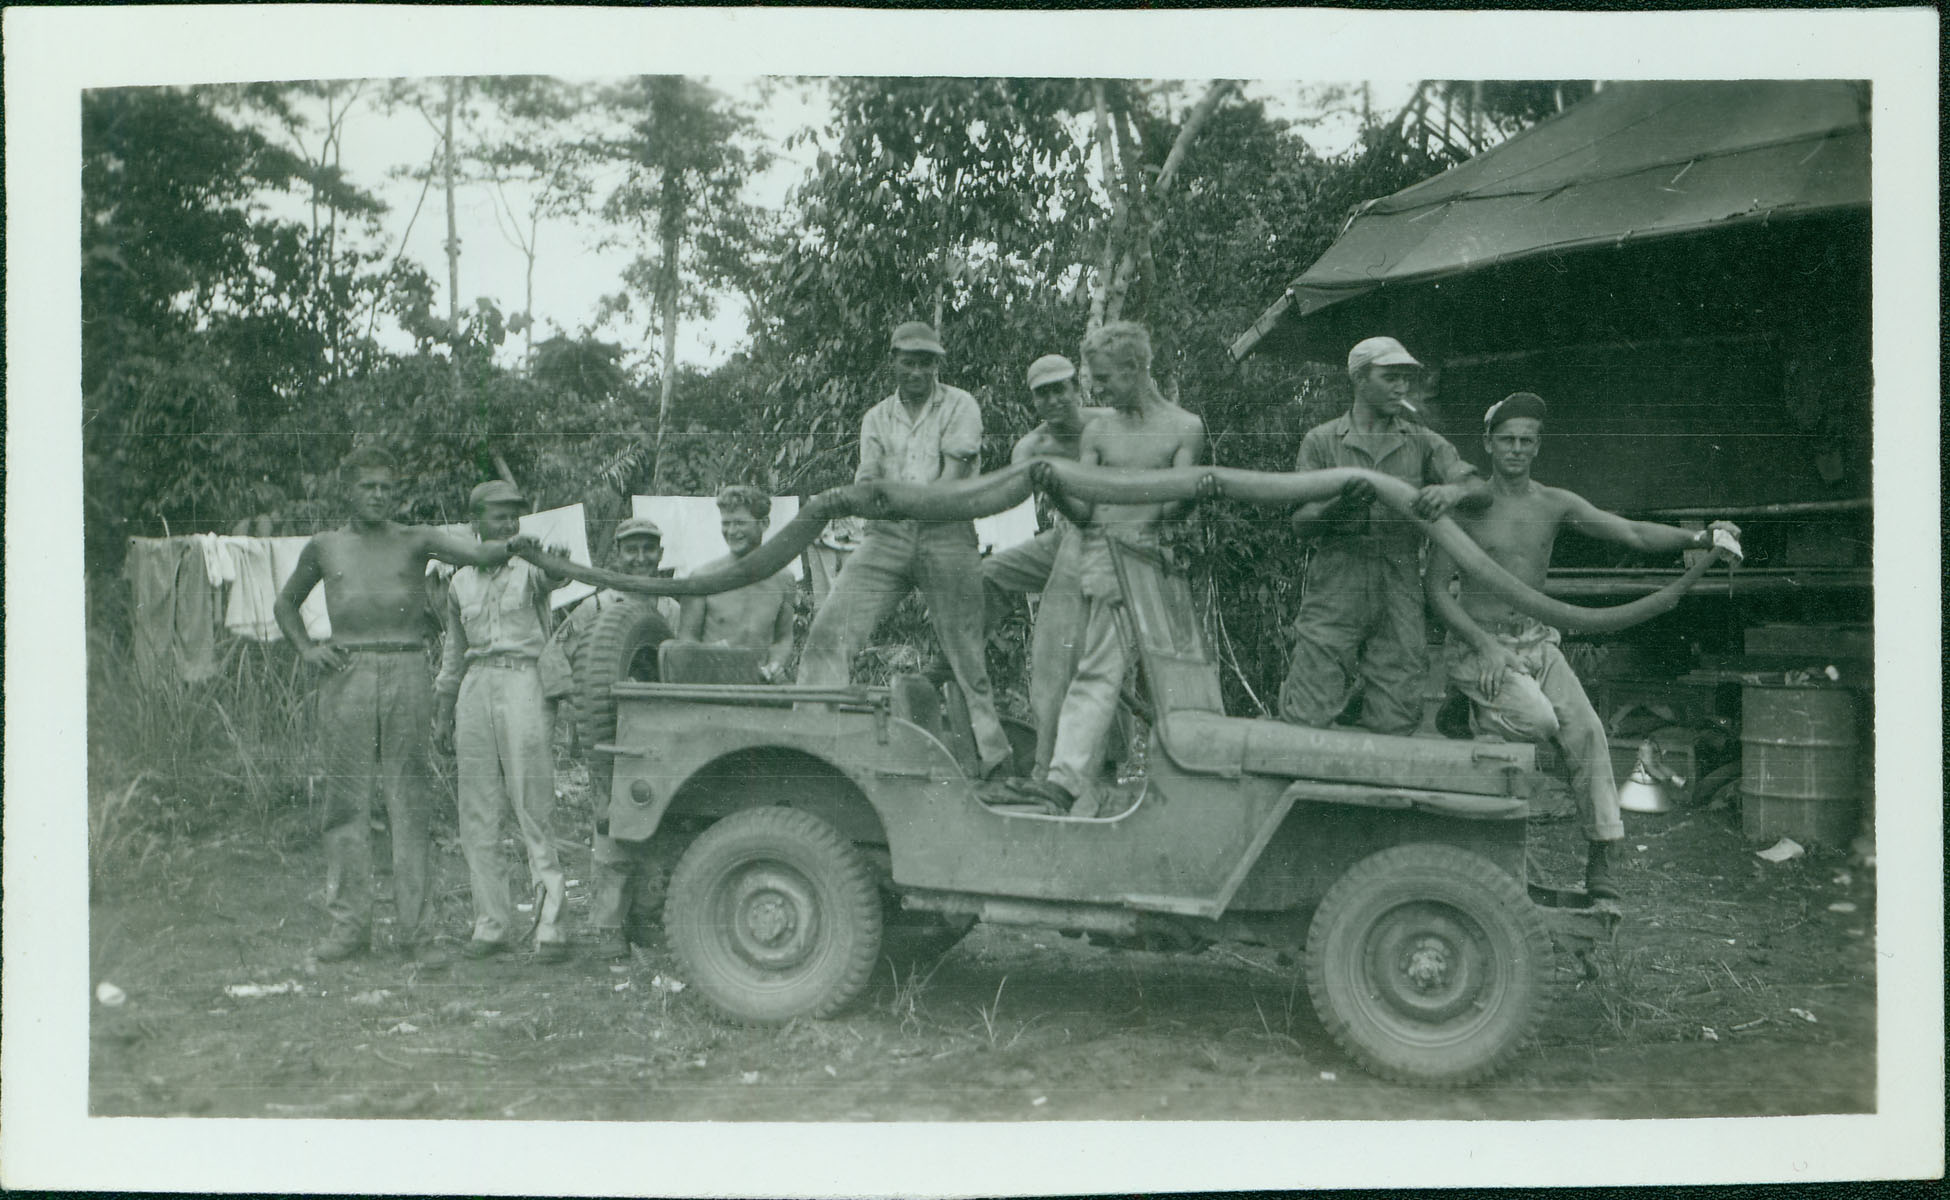 Men with large snake on jeep [RG5841-9-11]